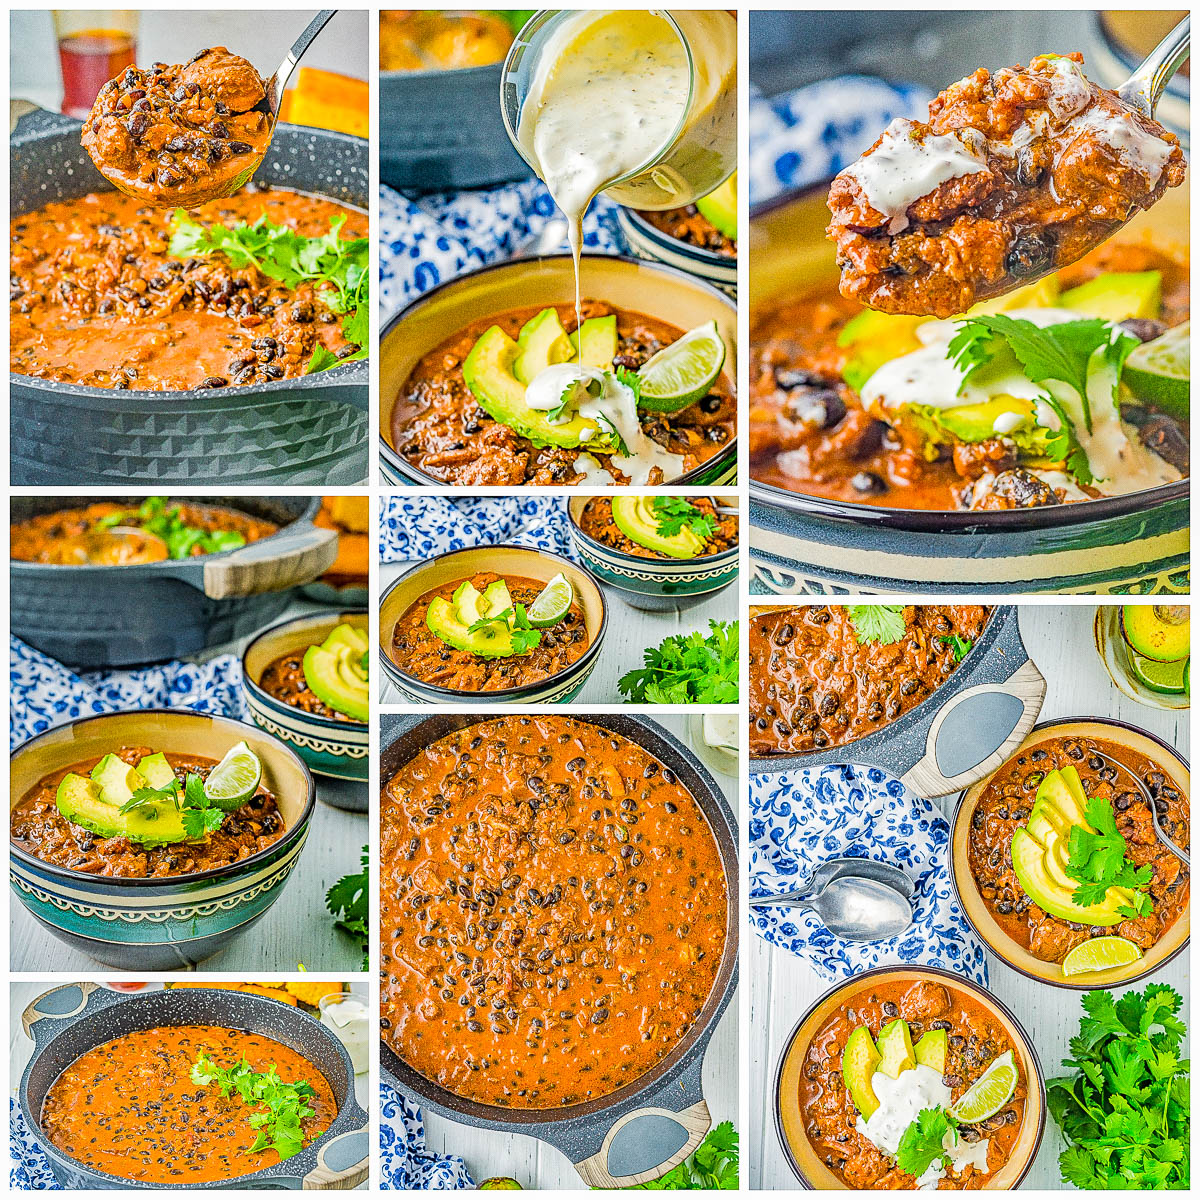 Triple Pork Black Bean Chili - Three types of pork including bacon, pork roast, and chorizo plus black beans and more in this comforting, hearty, and filling chili recipe! Easy and perfect for chilly weather, family dinners, or make it for game day or tailgating parties! 